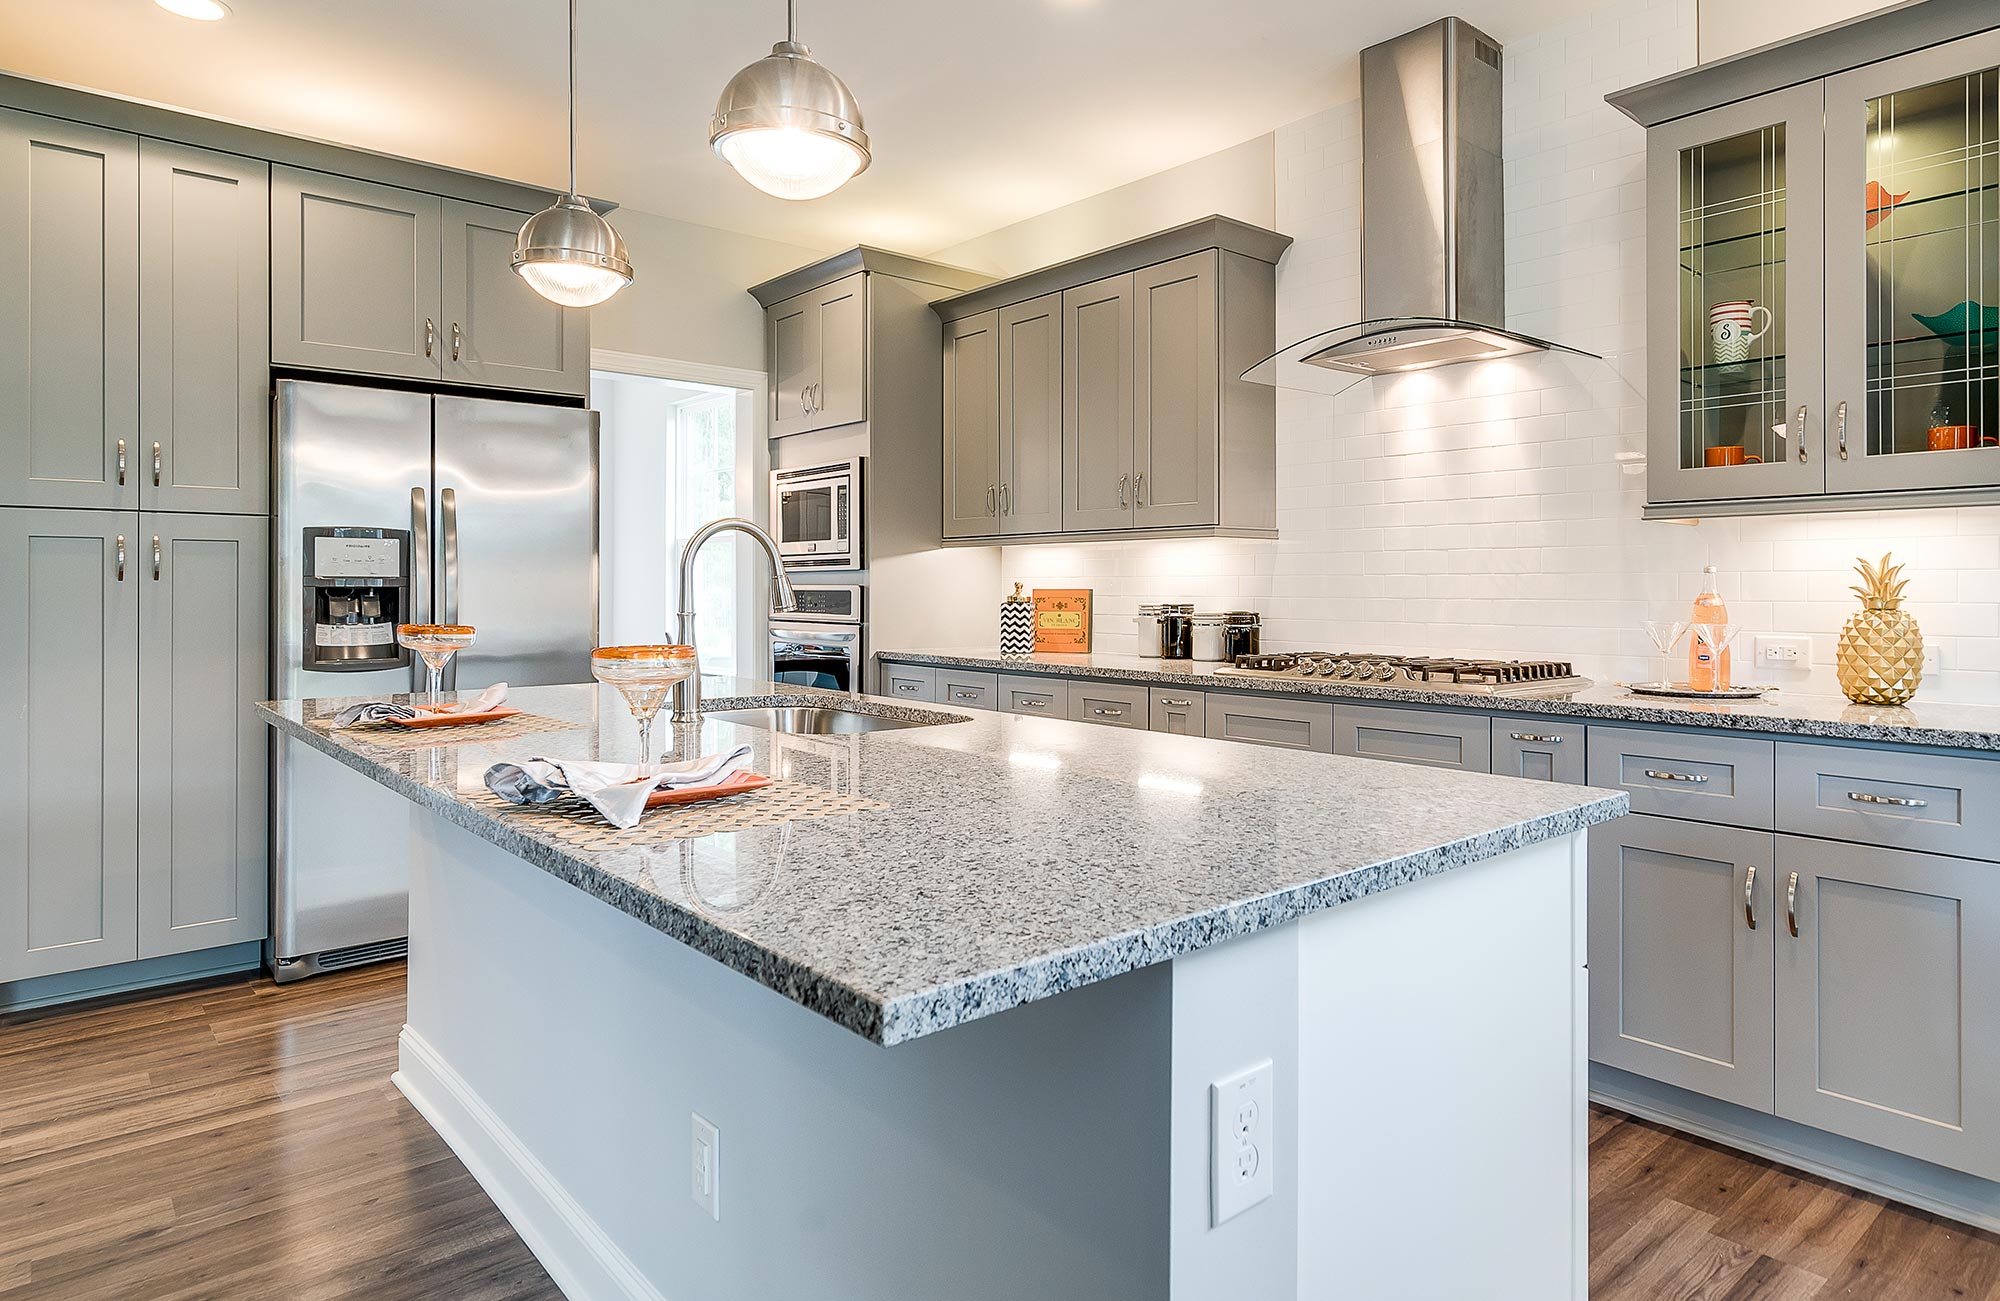 Marble & Granite Countertops Your Family Will Love